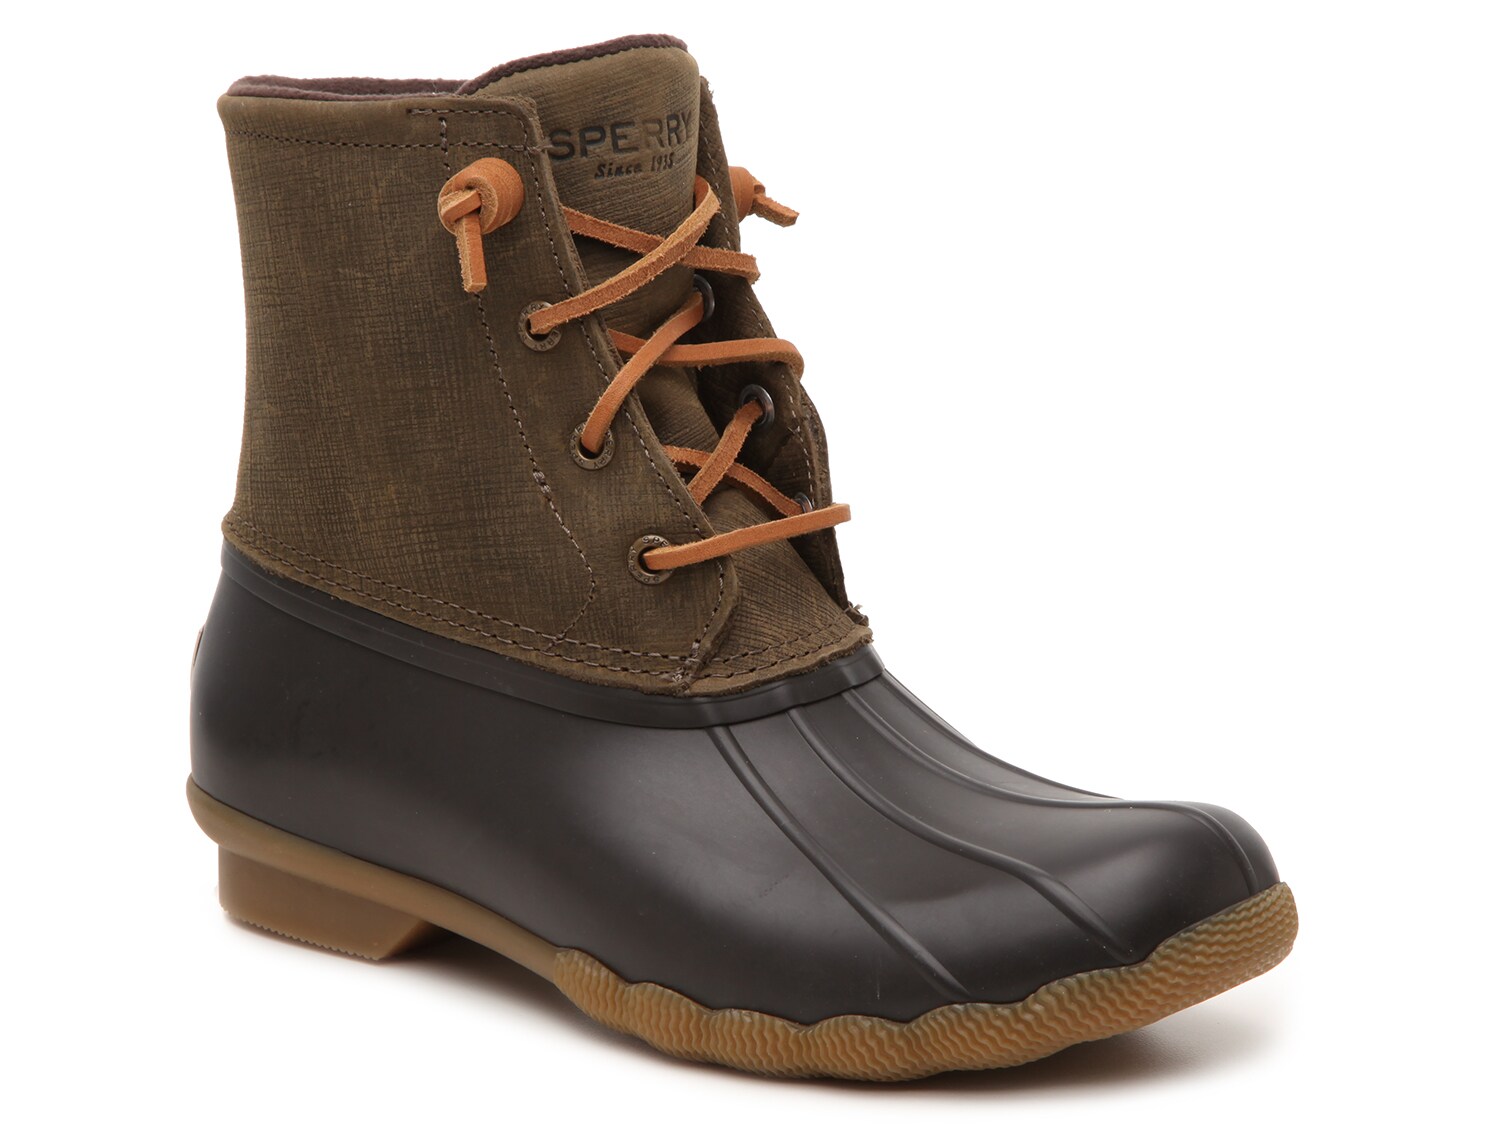 Sperry Saltwater Leather Duck Boot | DSW